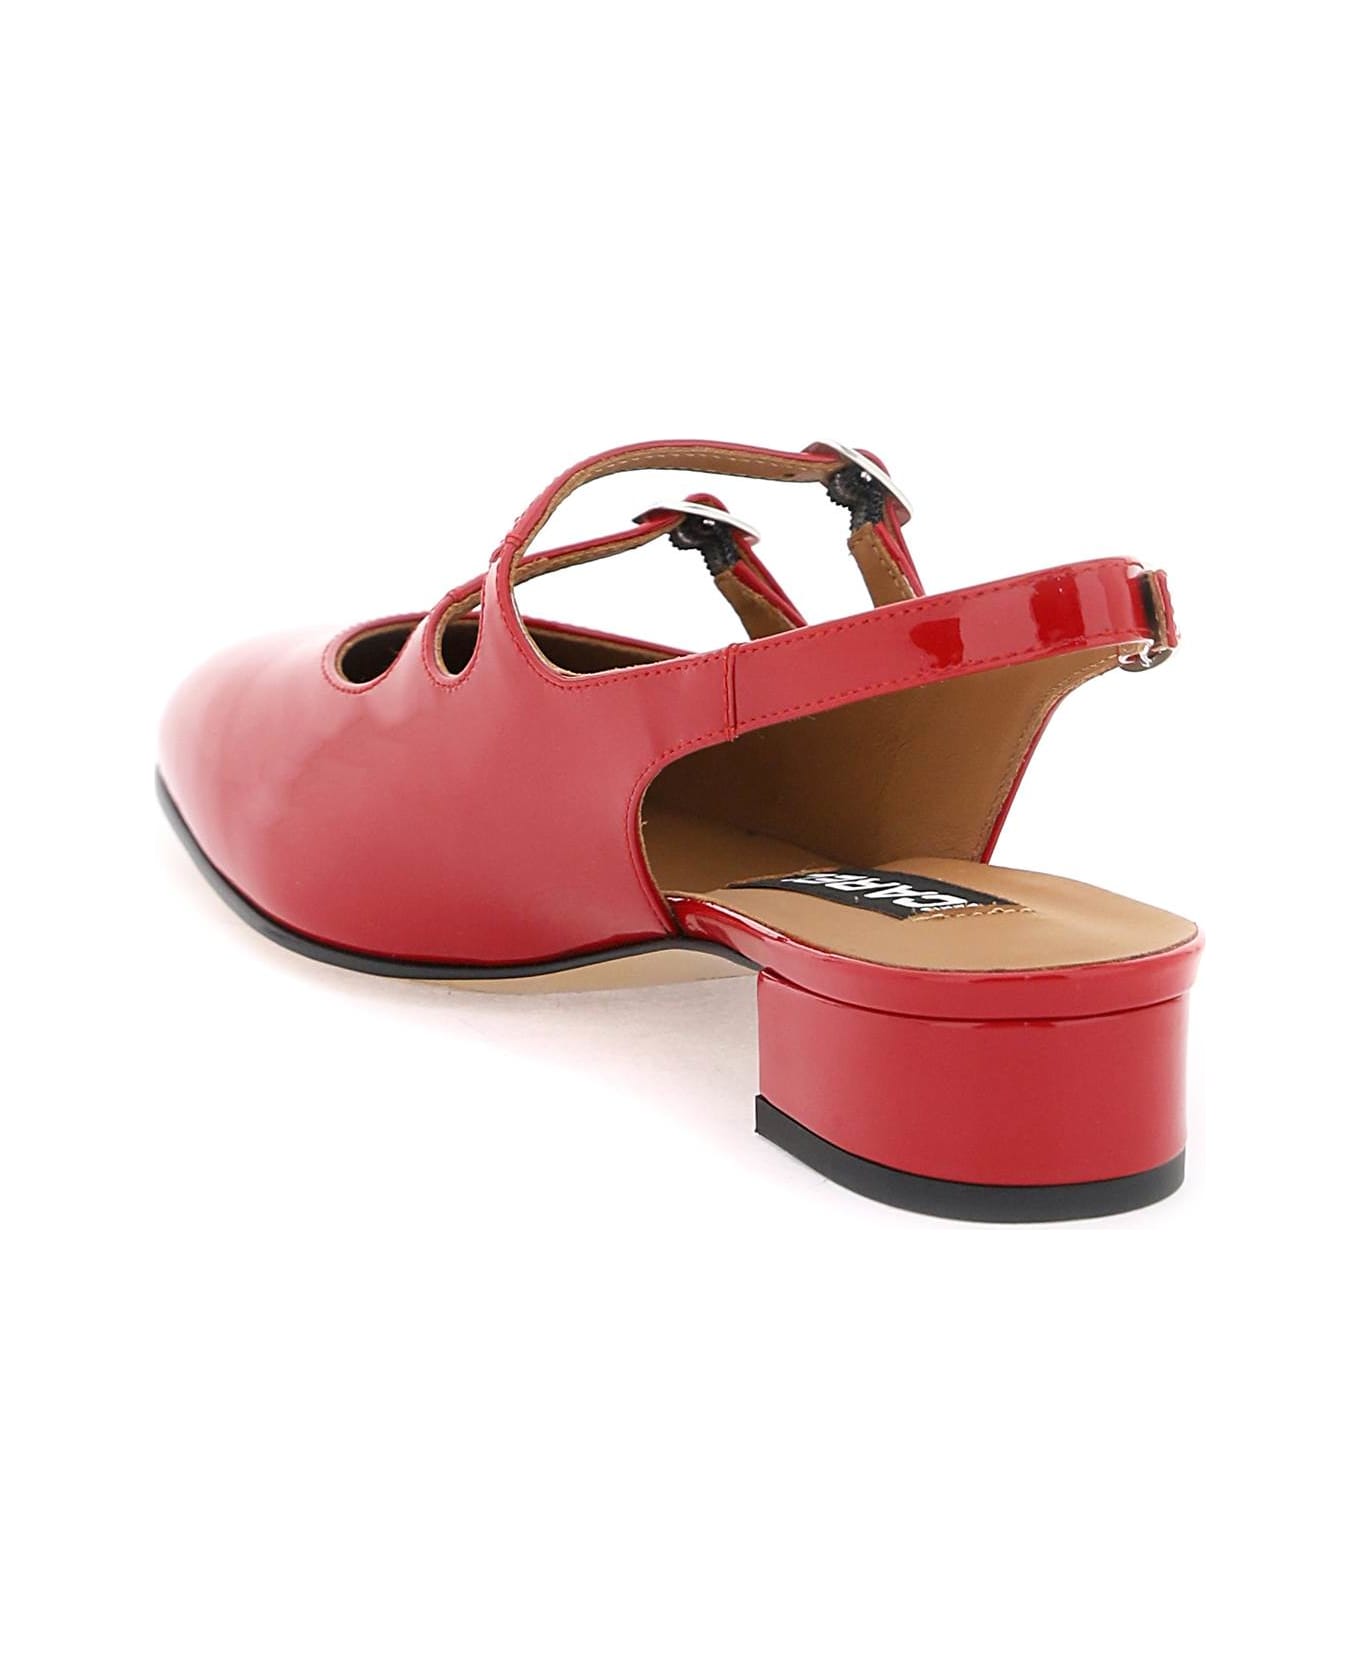 Carel Patent Leather Pêche Slingback Mary Jane - ROUGE (Red)